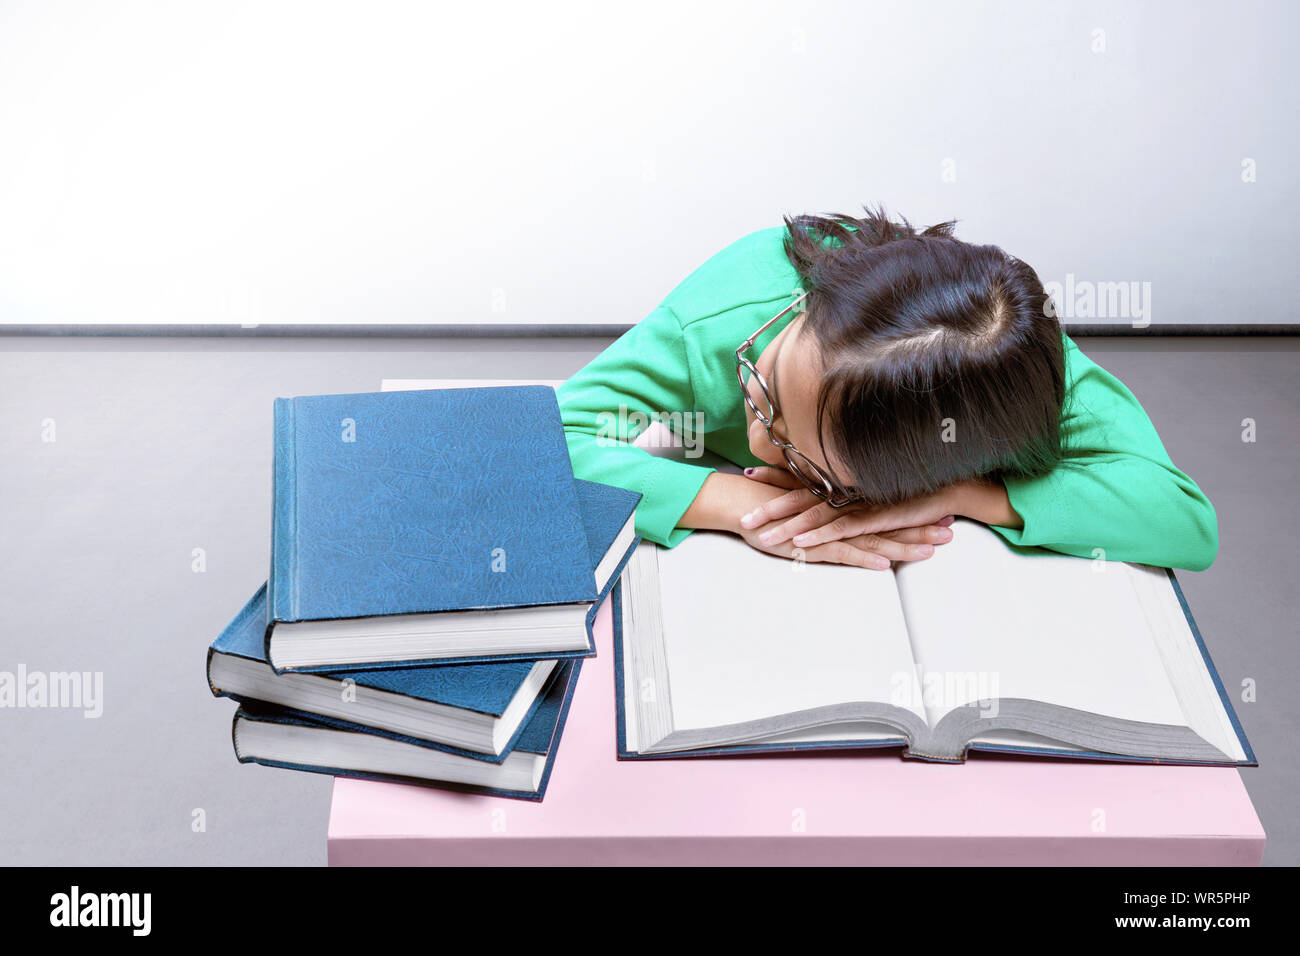 Asian cute girl with glasses fall asleep on a book on the desk at home Stock Photo